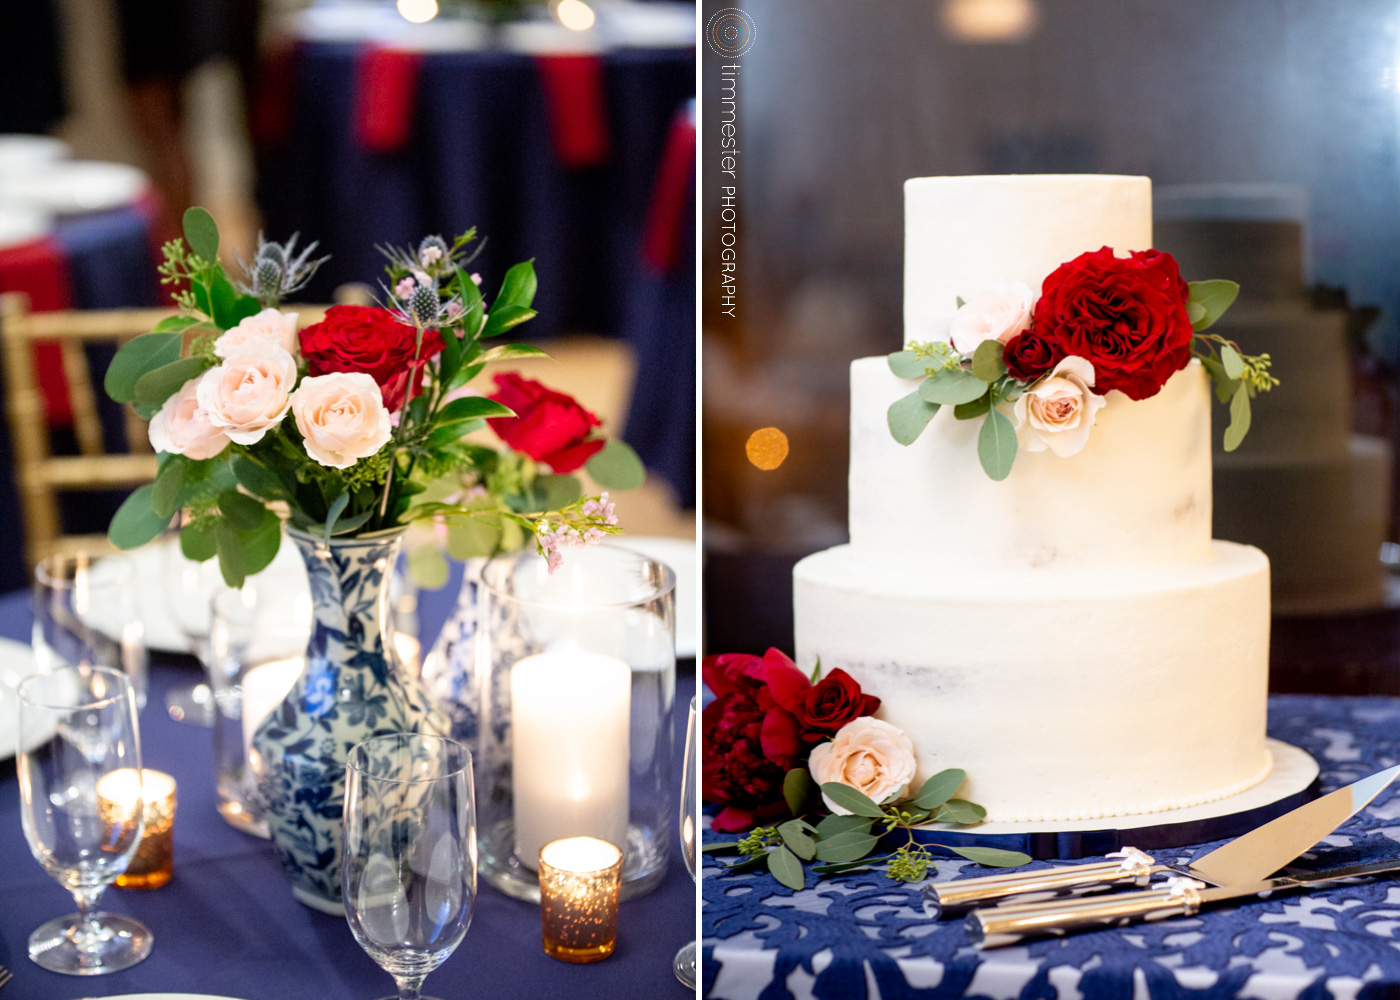 The Cannon Room in Raleigh, NC with flowers by The English Garden and cake by Love Cake.